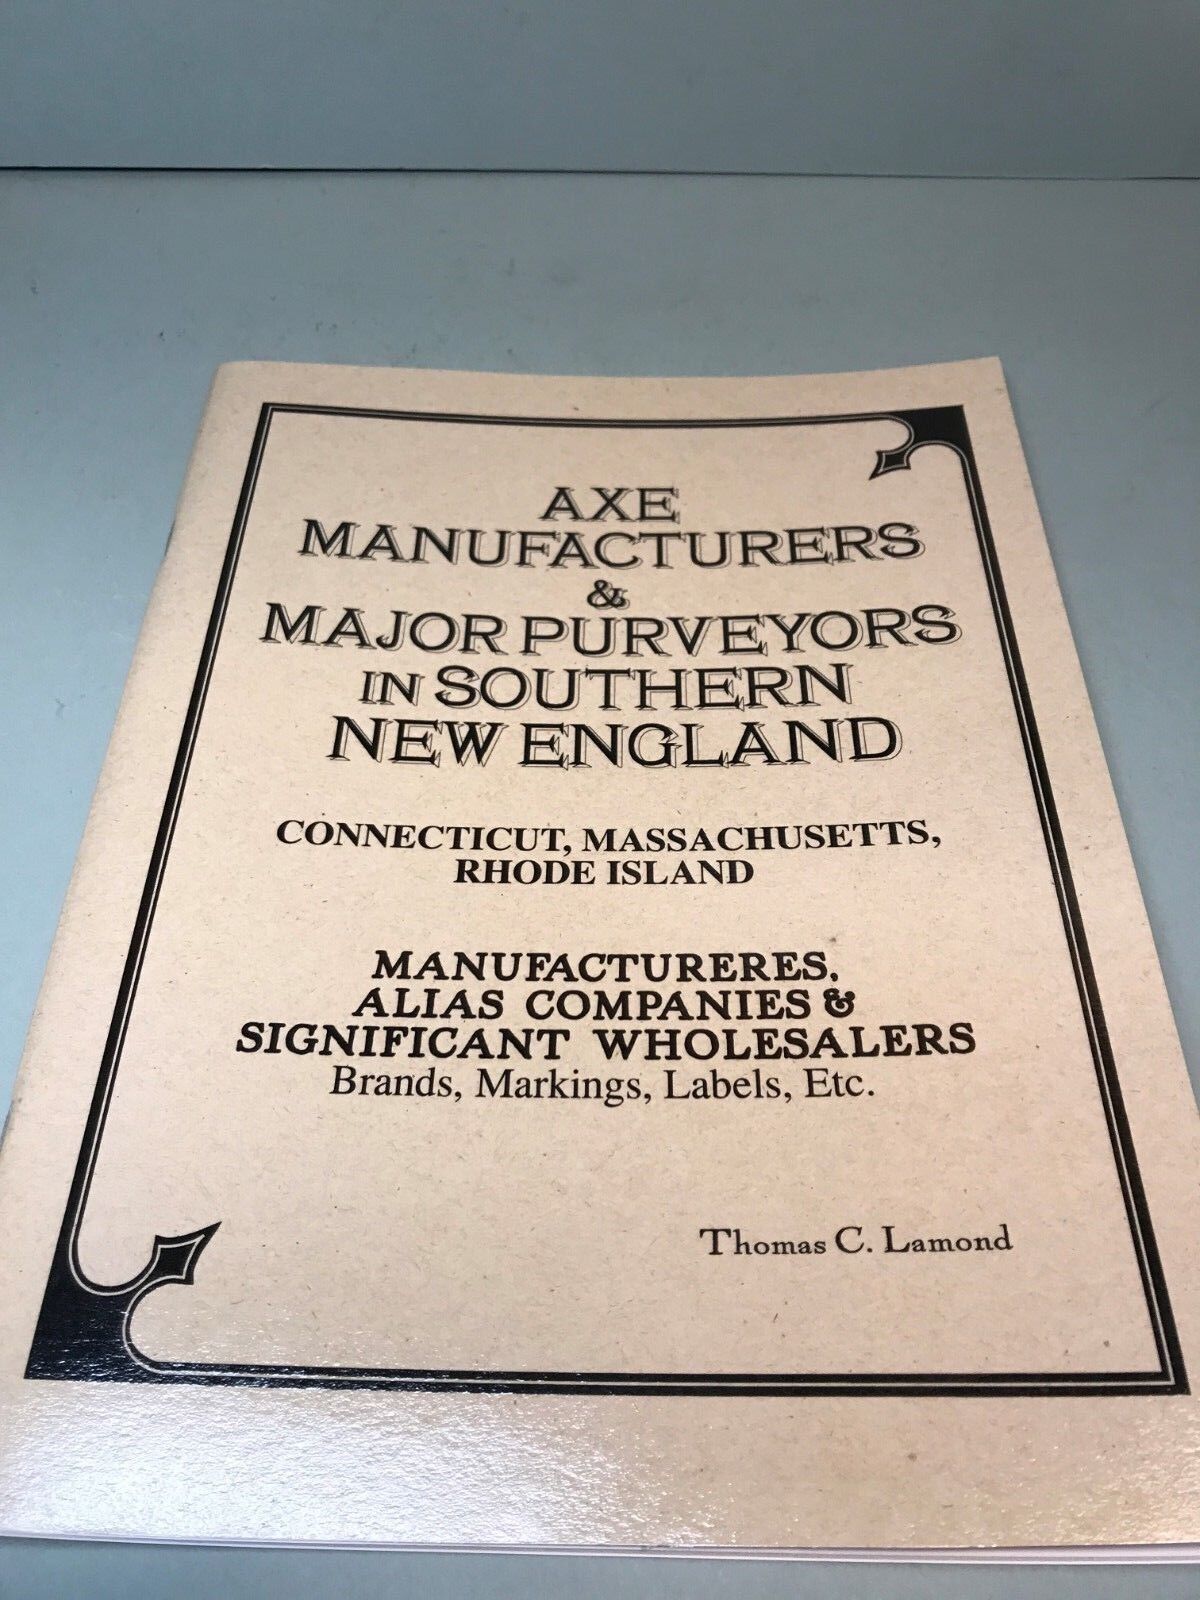 AXE MANUFACTURERS & PURVEYORS IN SOUTHERN NEW ENGLAND  BY THOMAS LAMOND